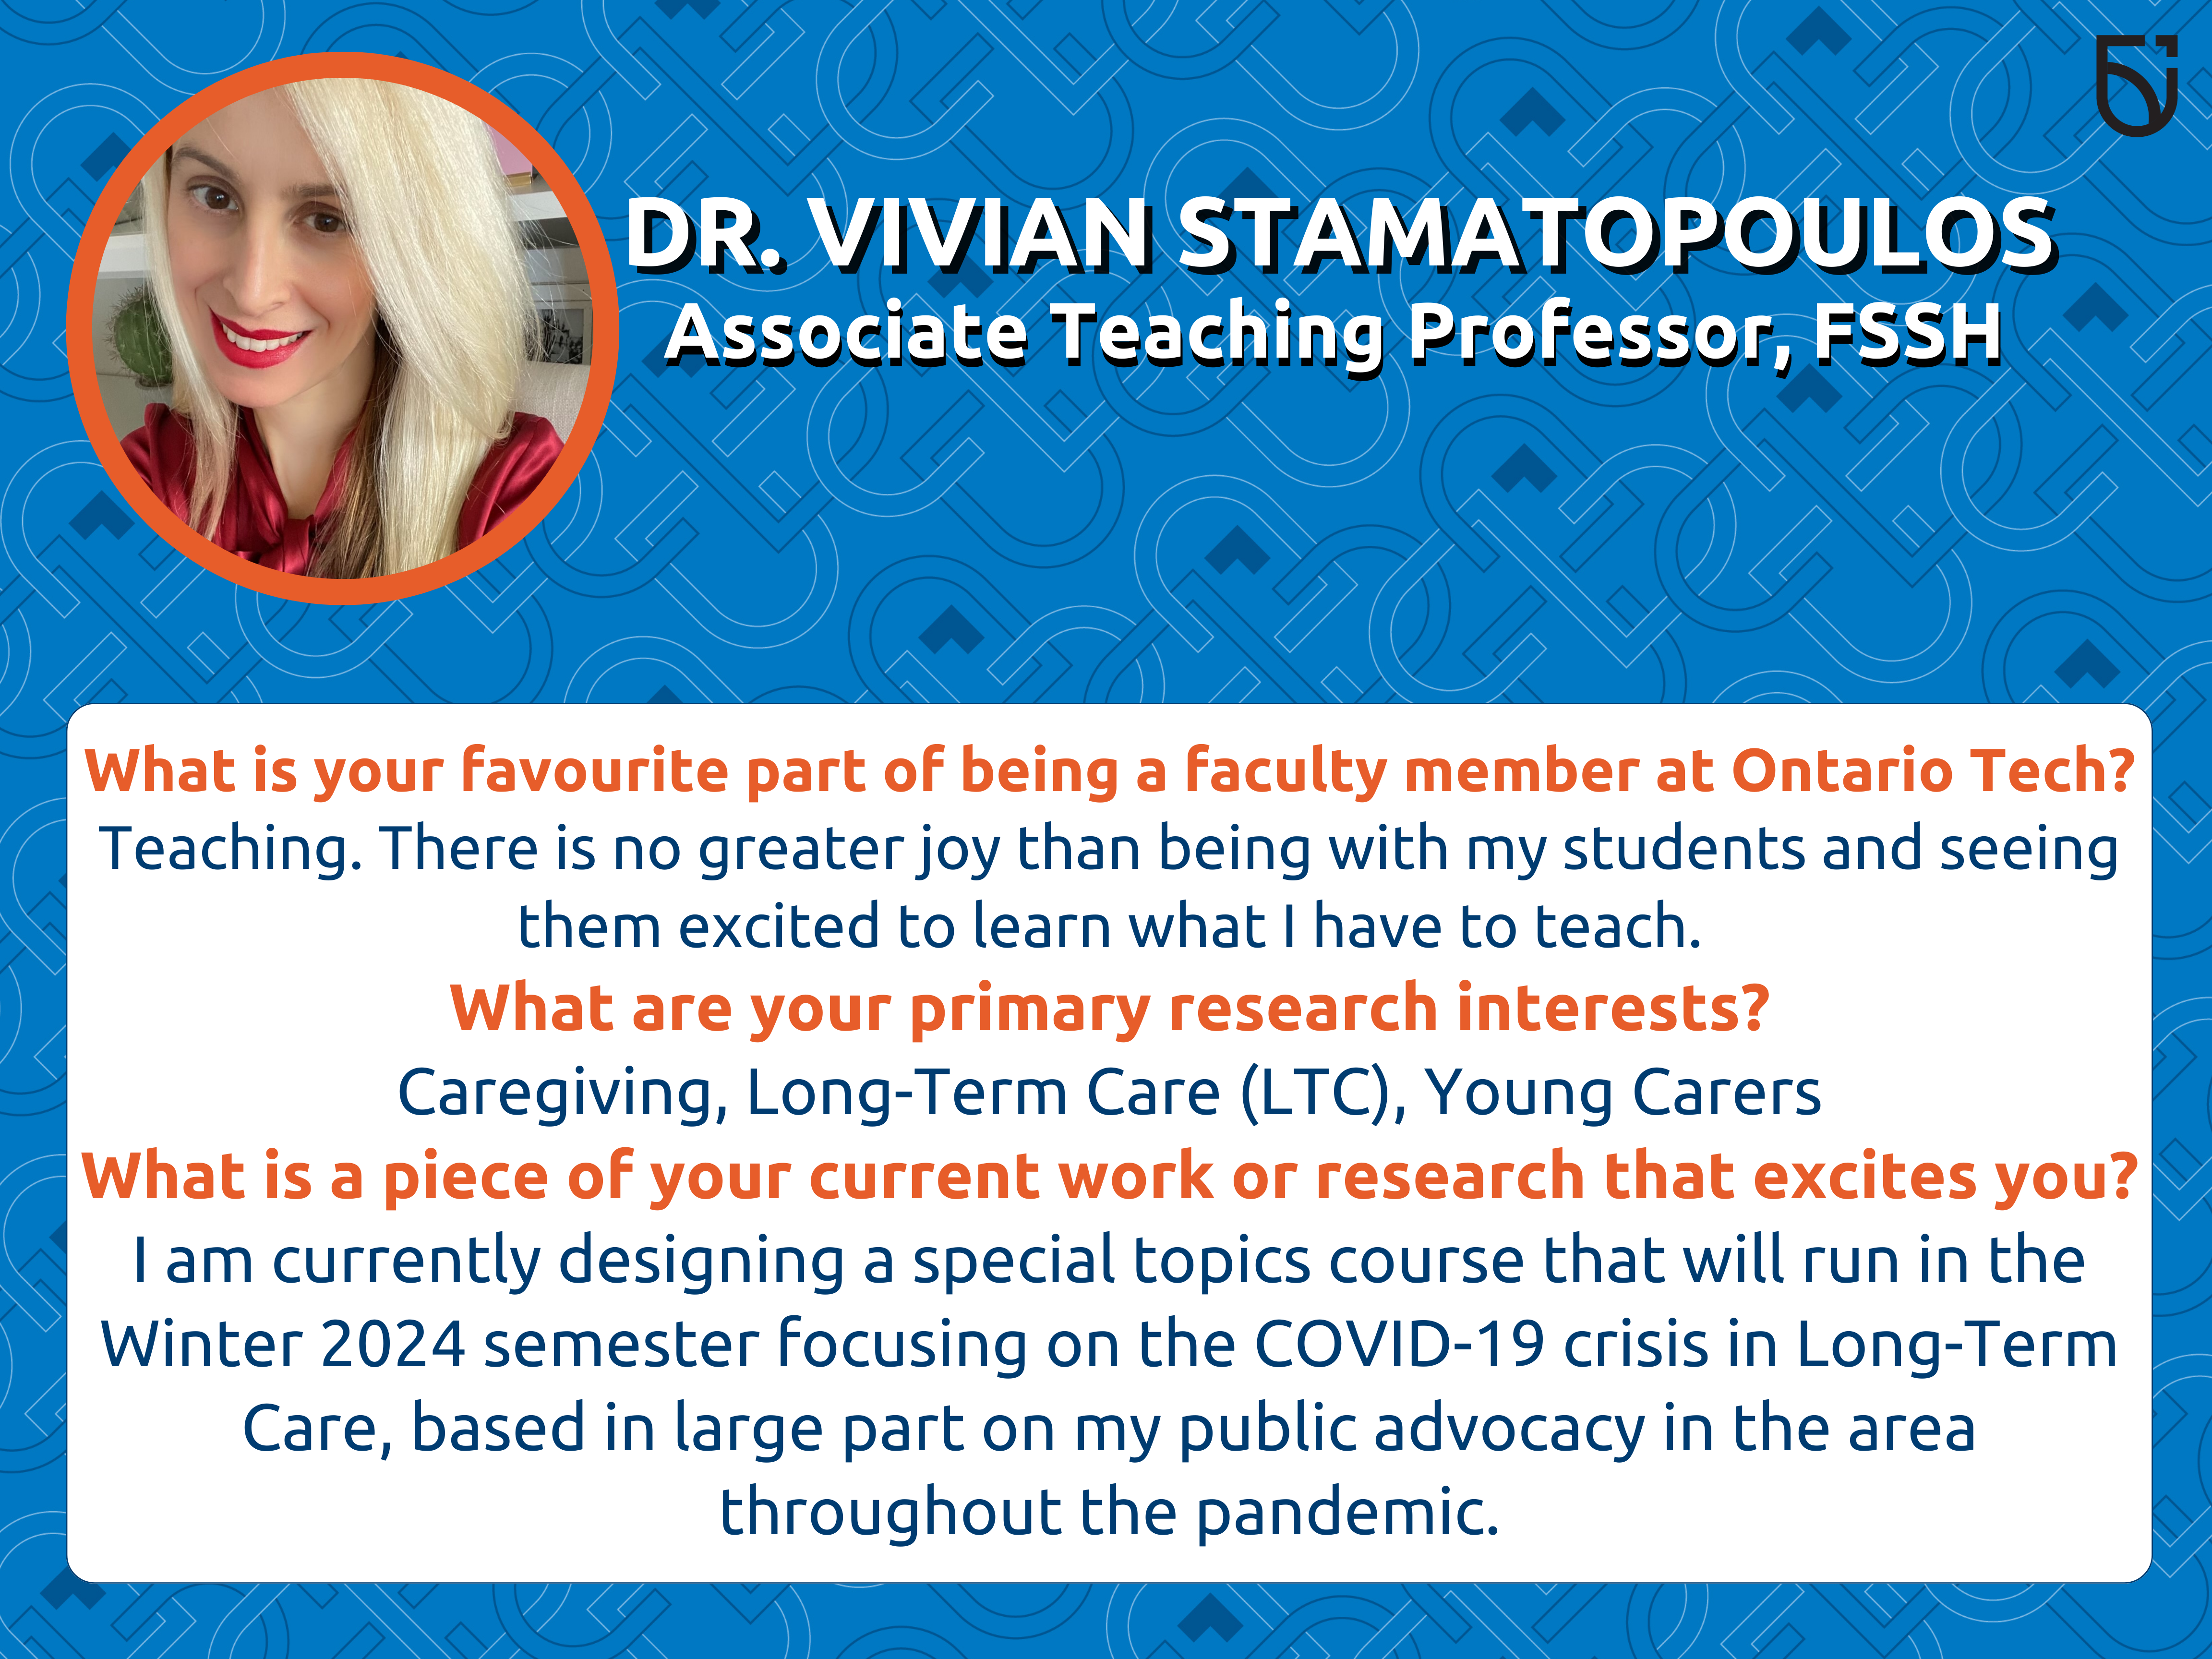 This photo is a Women’s Wednesday feature of Dr. Vivian Stamatopoulos, an Associate Teaching Professor in the Faculty of Social Science and Humanities